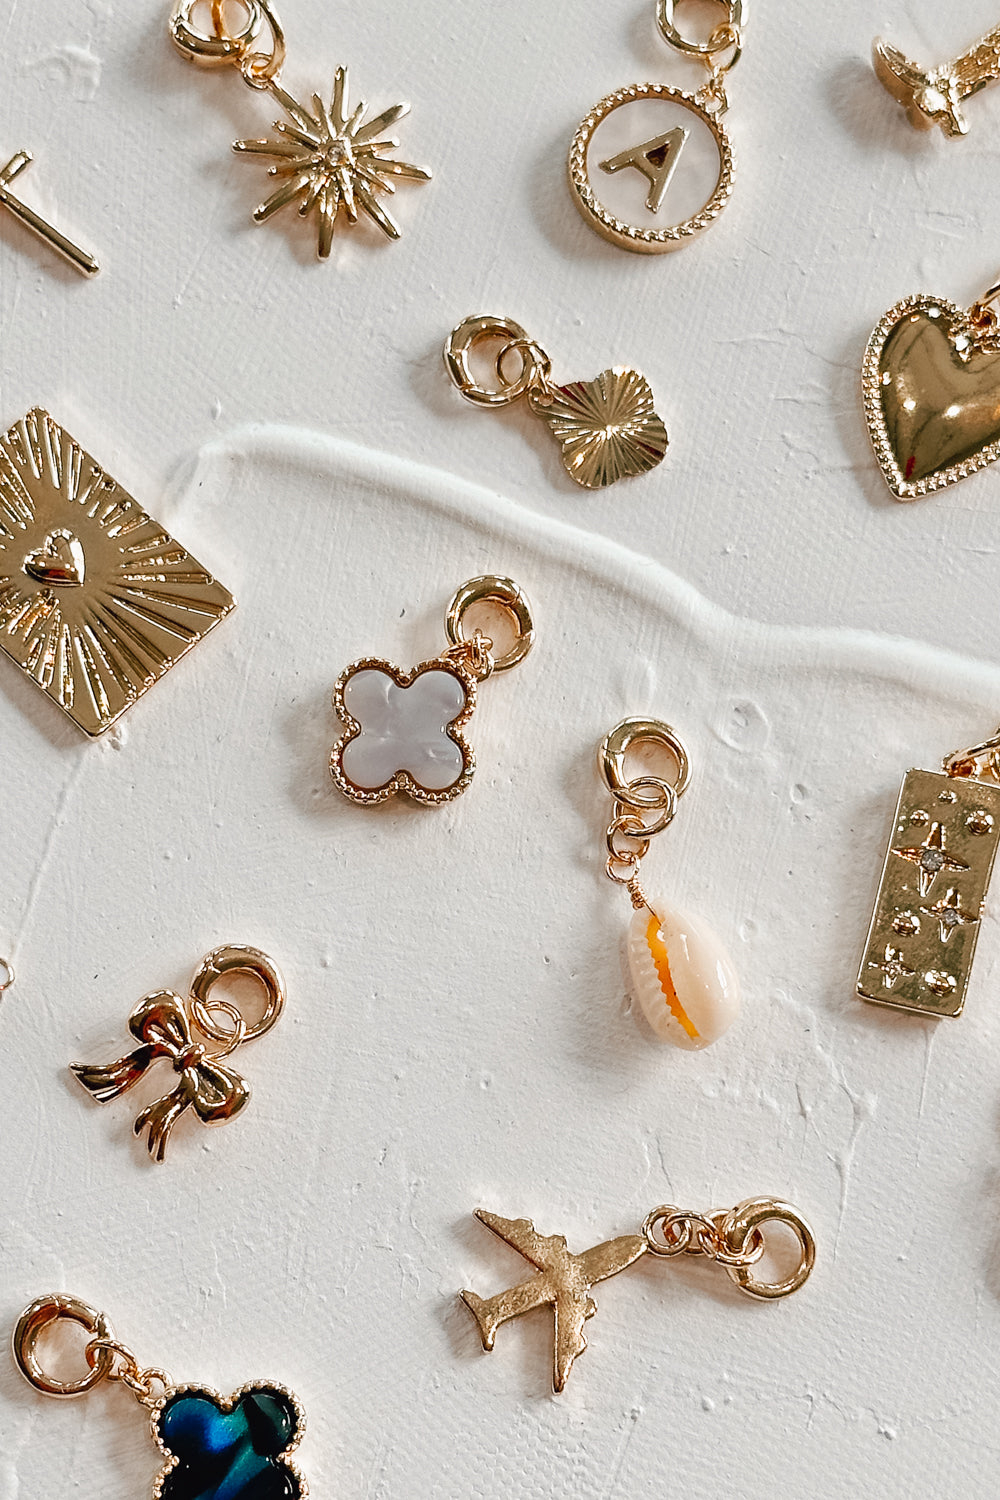 Image shows assorted charms against a white background. Charms pictured include white clover, gold clover, heart, star medallion, airplane, black clover, bow, cowboy boy, heart medallion, and starbust.